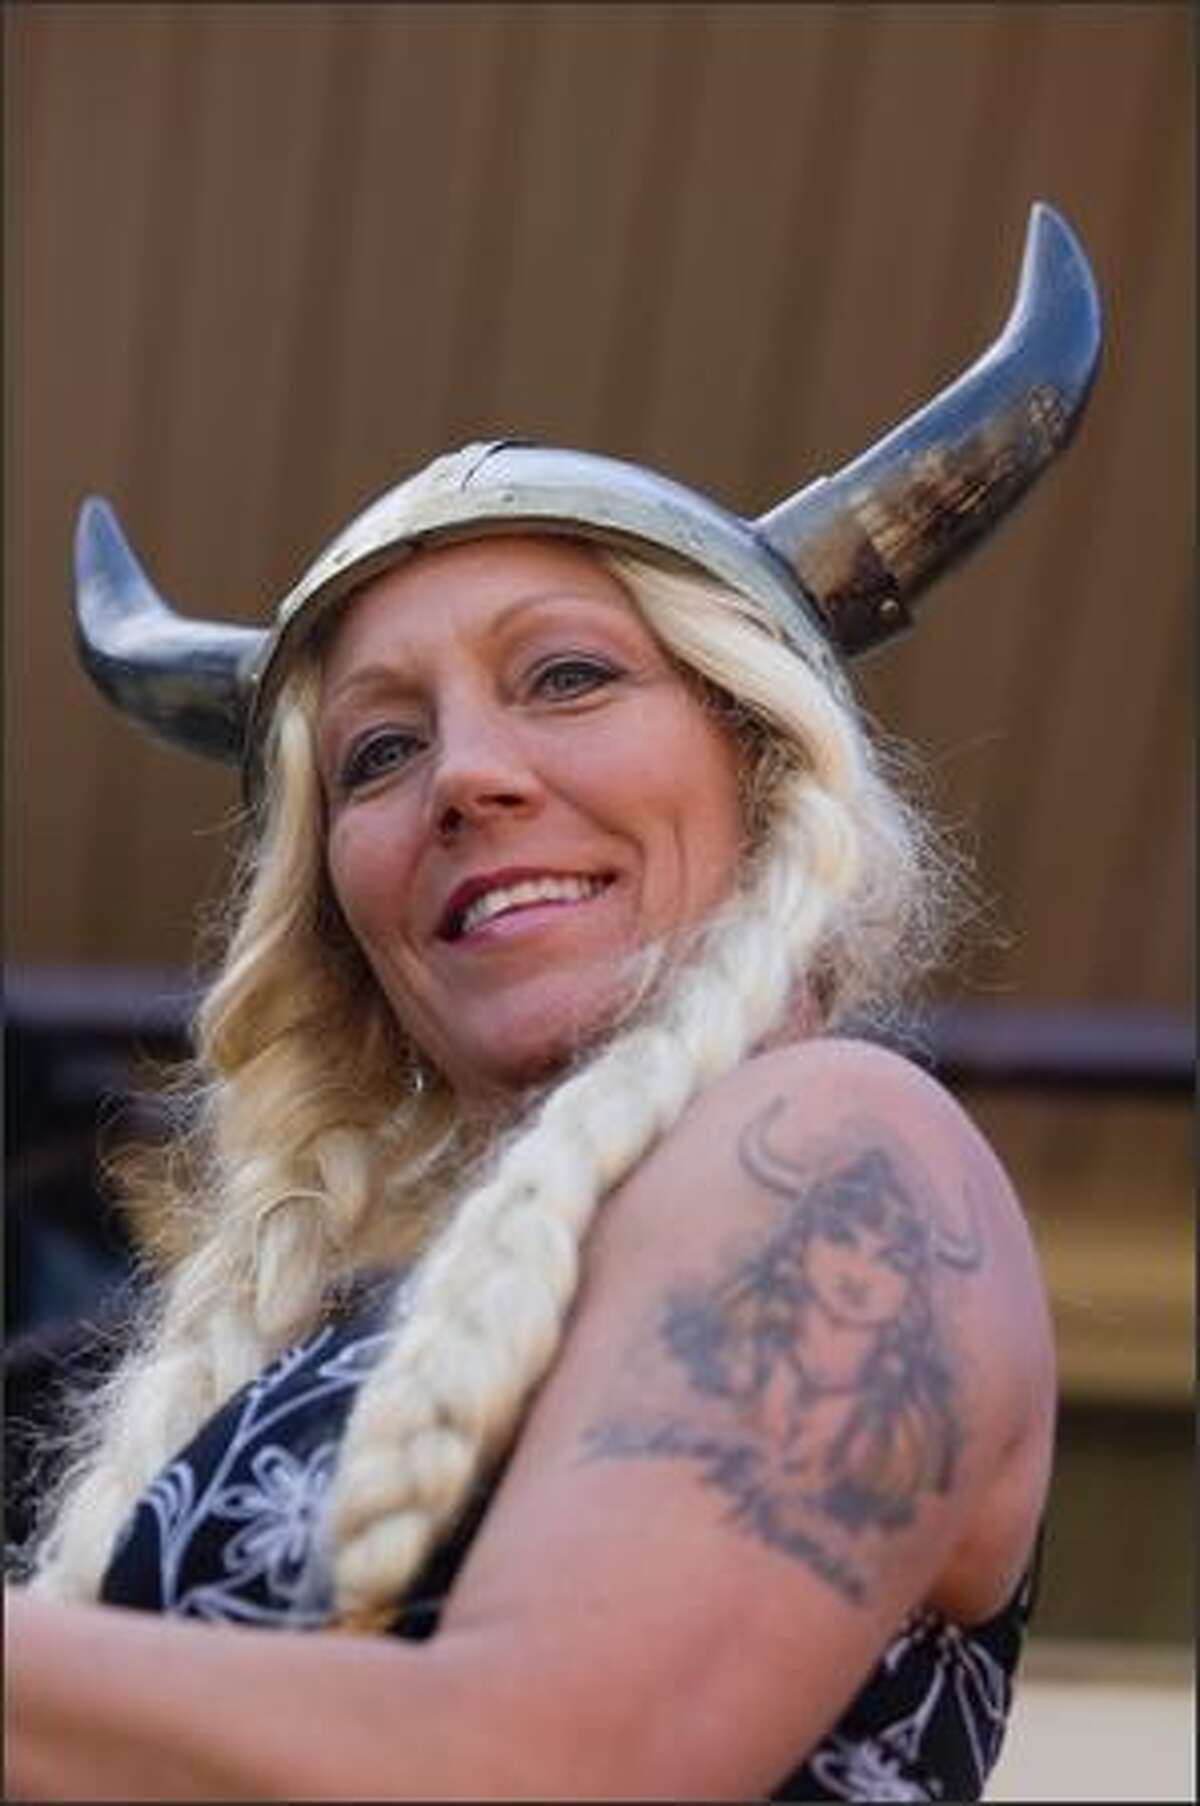 Lisa Hageselle's Viking hat matches the Viking tattoo on her arm while marching during the Norwegian Constitution Day parade in Ballard Sunday.